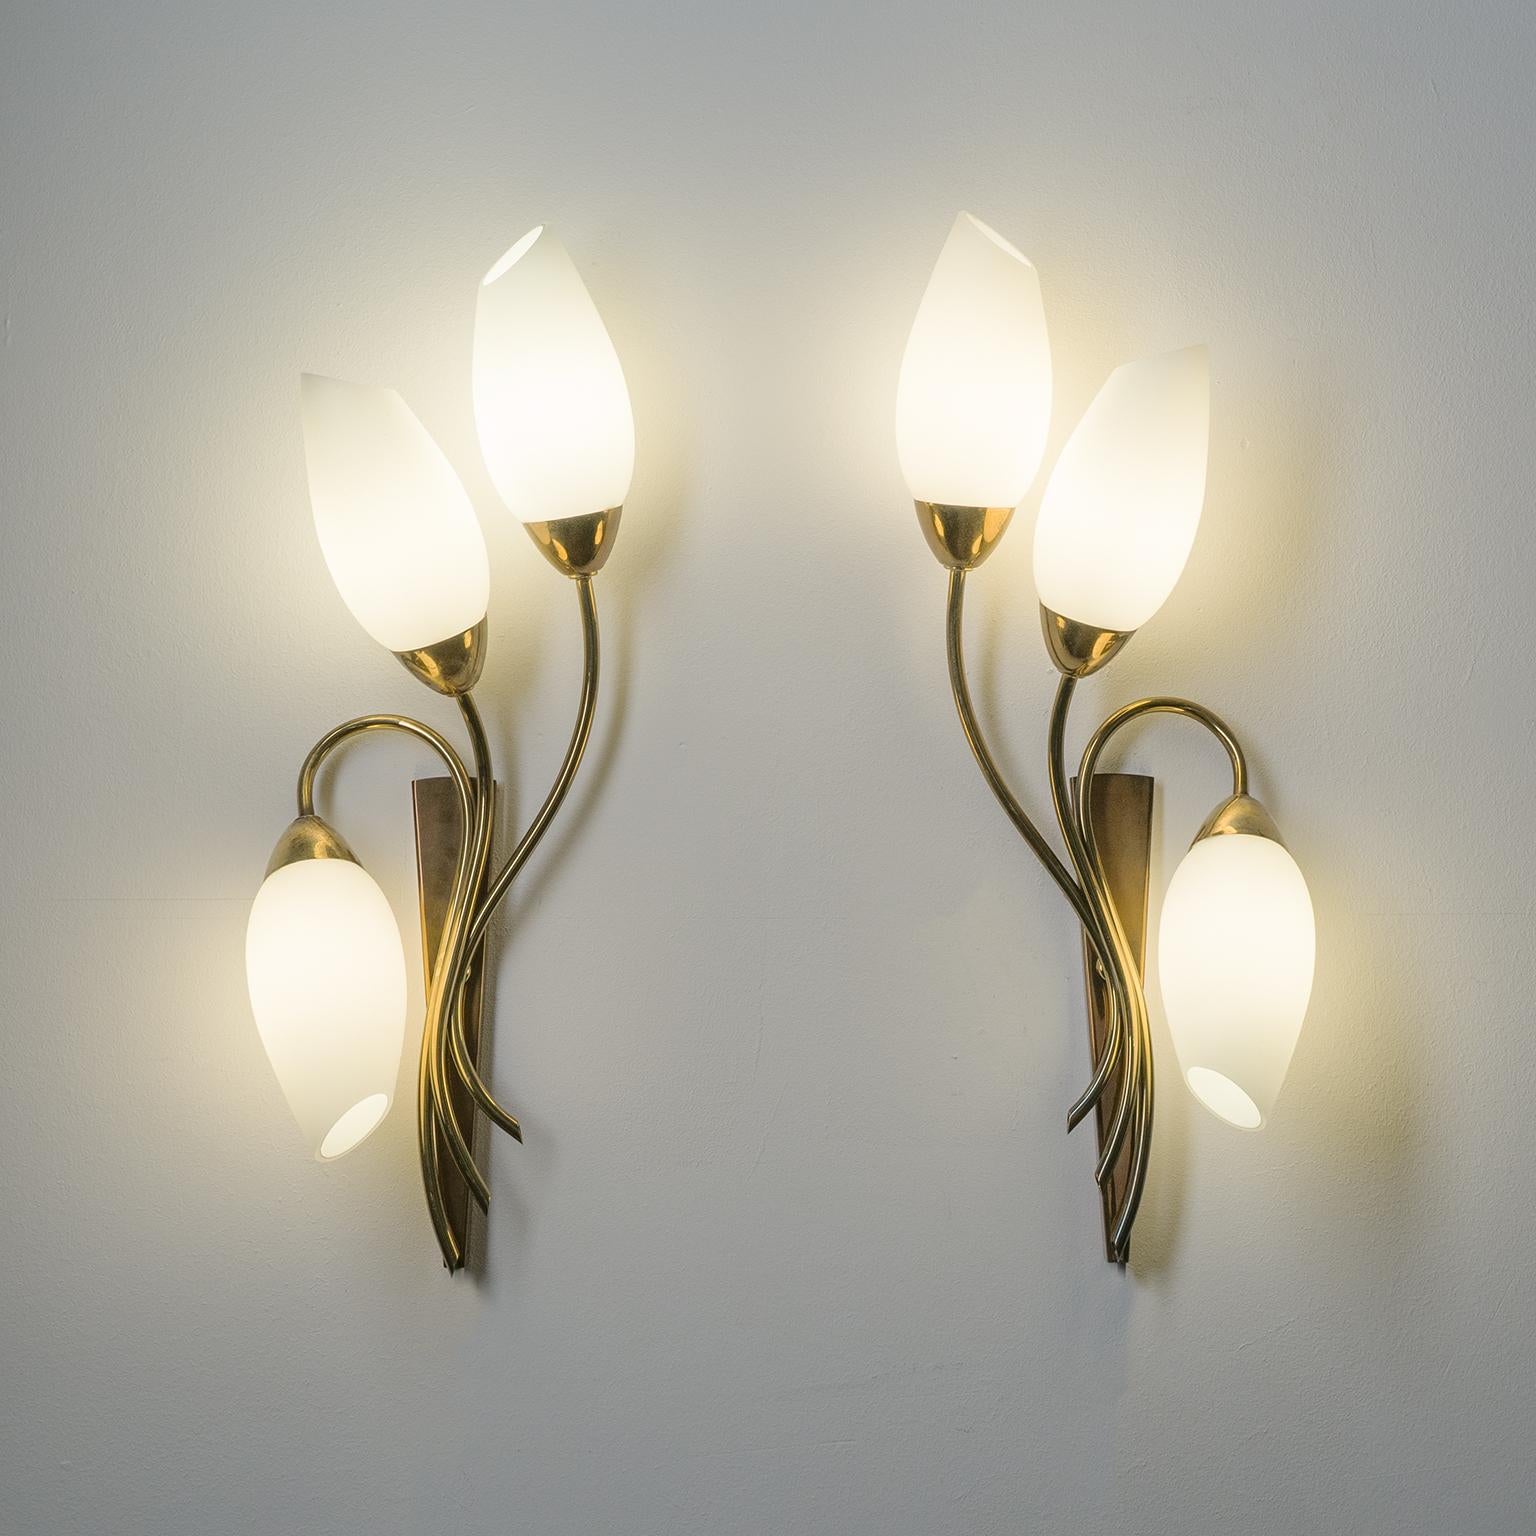 Large French Wall Lights, 1950s, Brass and Satin Glass 12